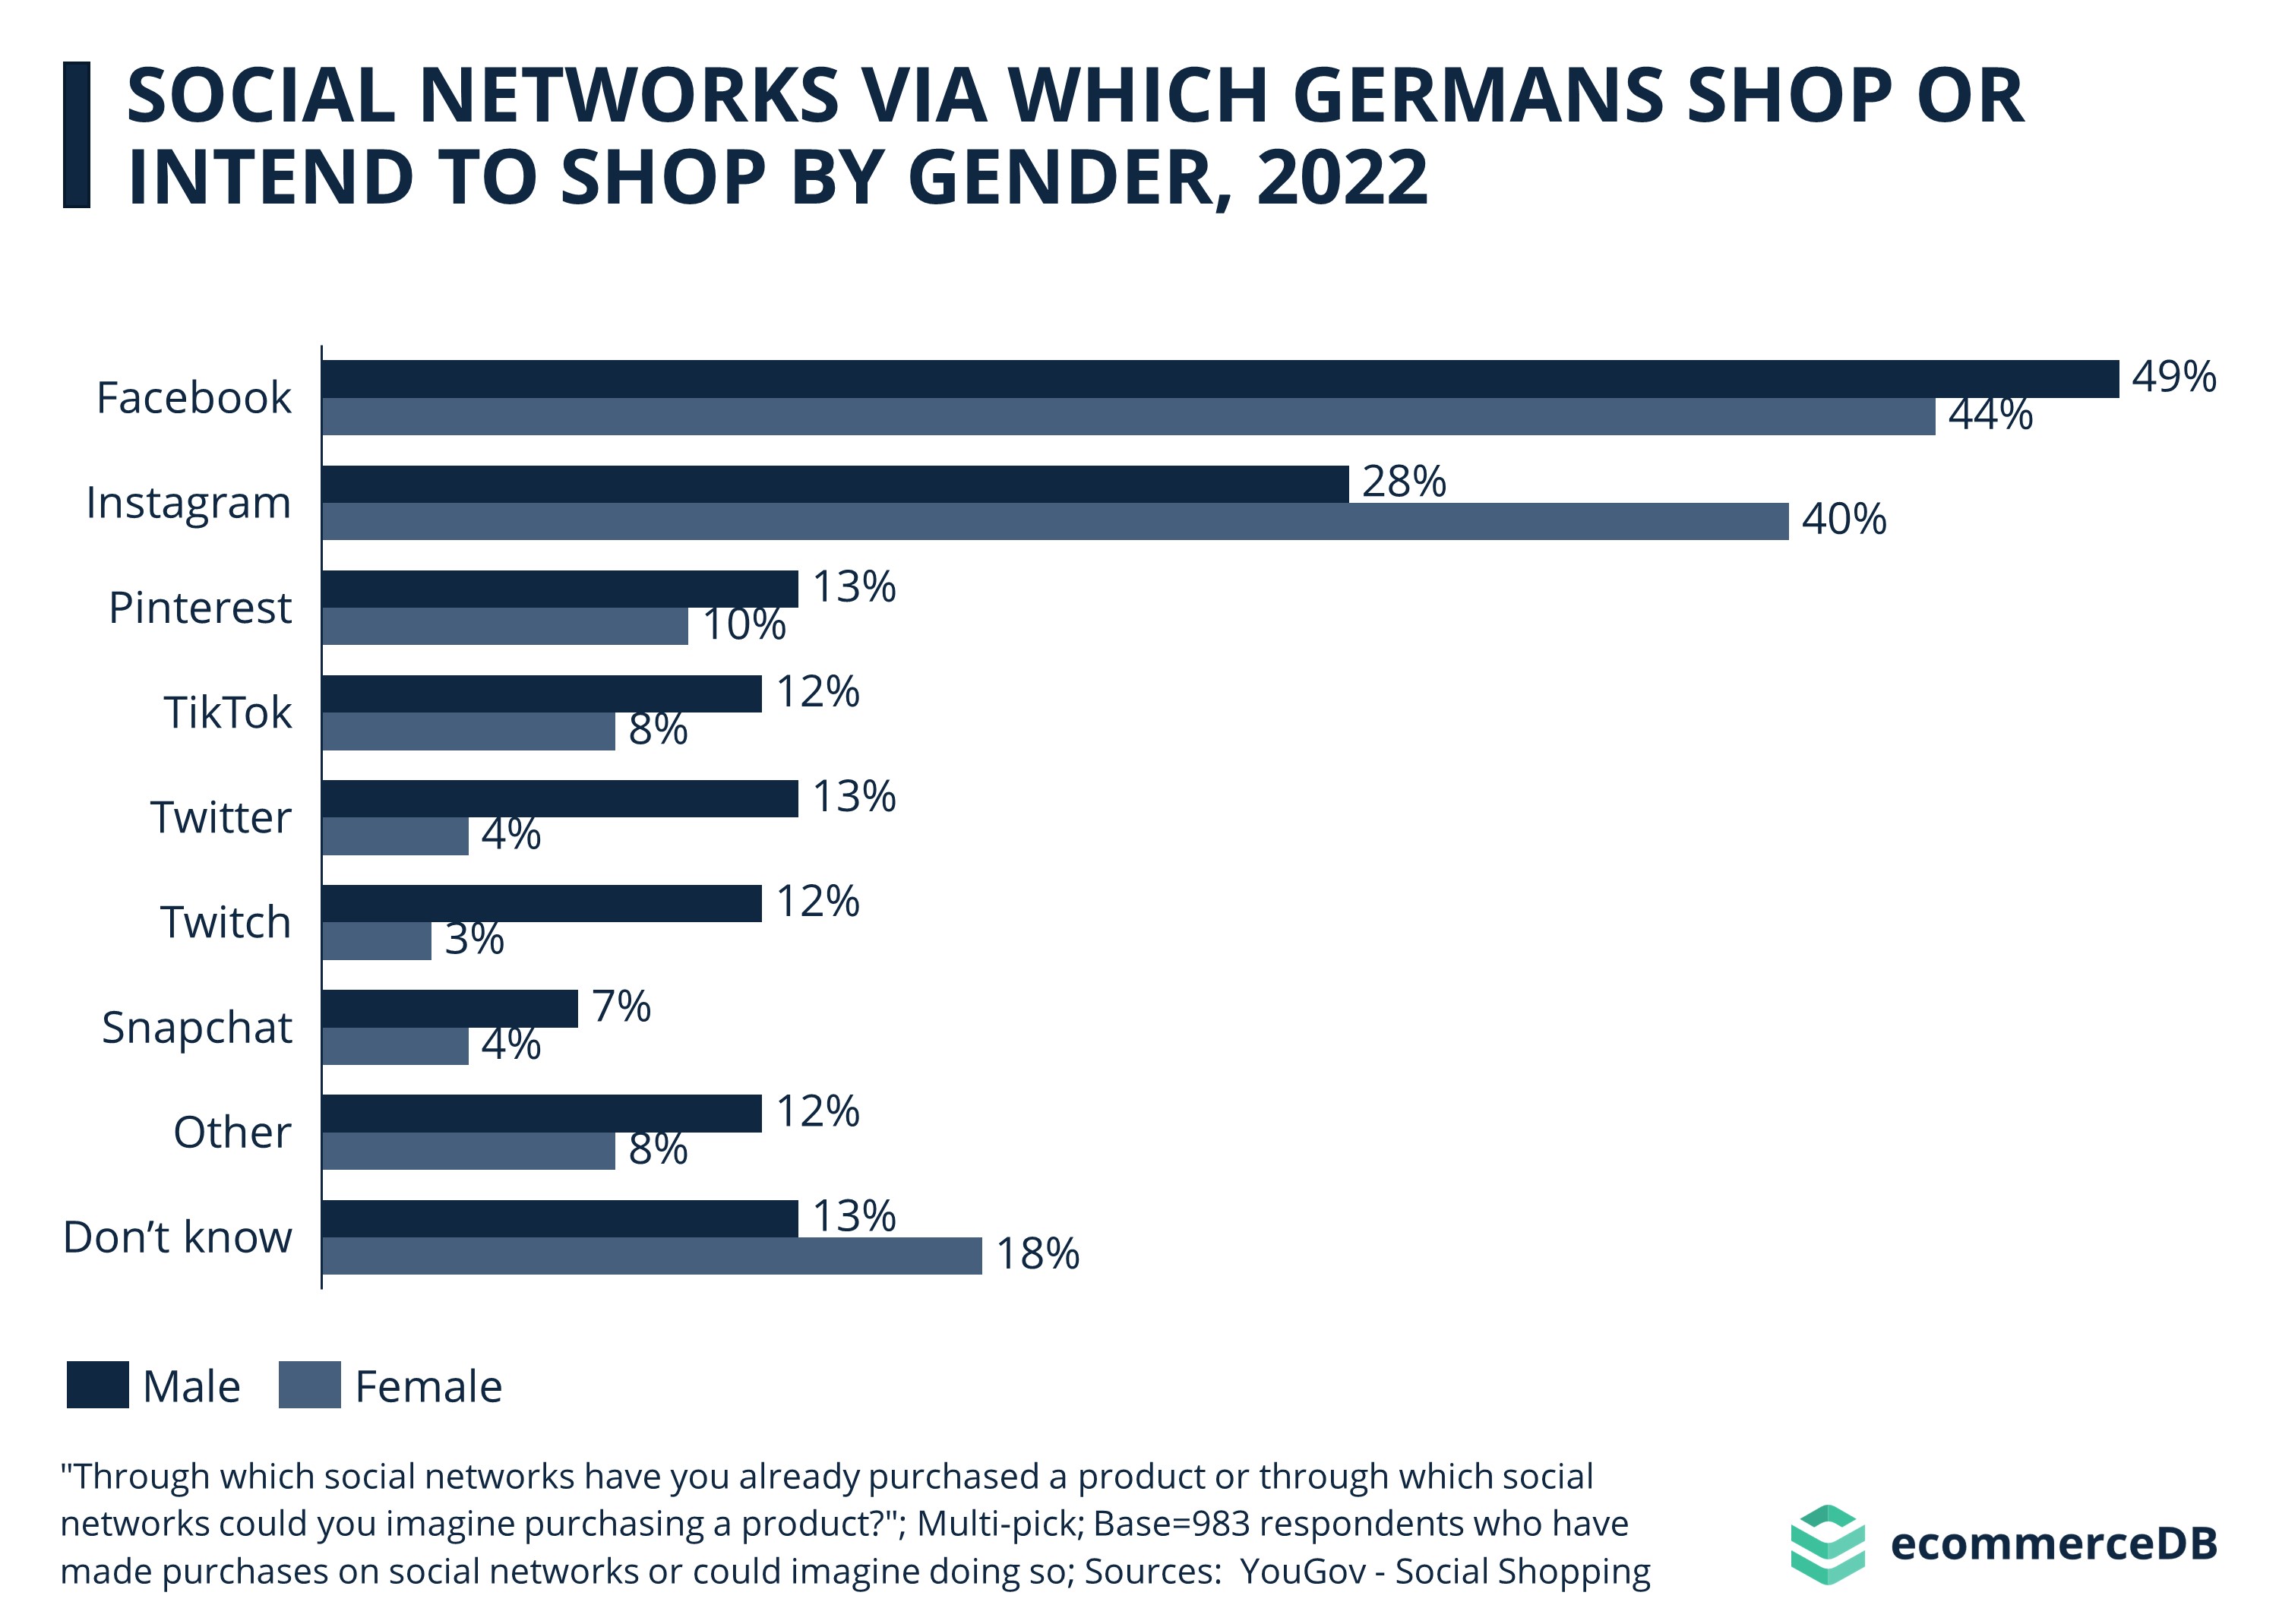 Social Network via Which Germans Shop or Intend to Shop by Gender, 2022